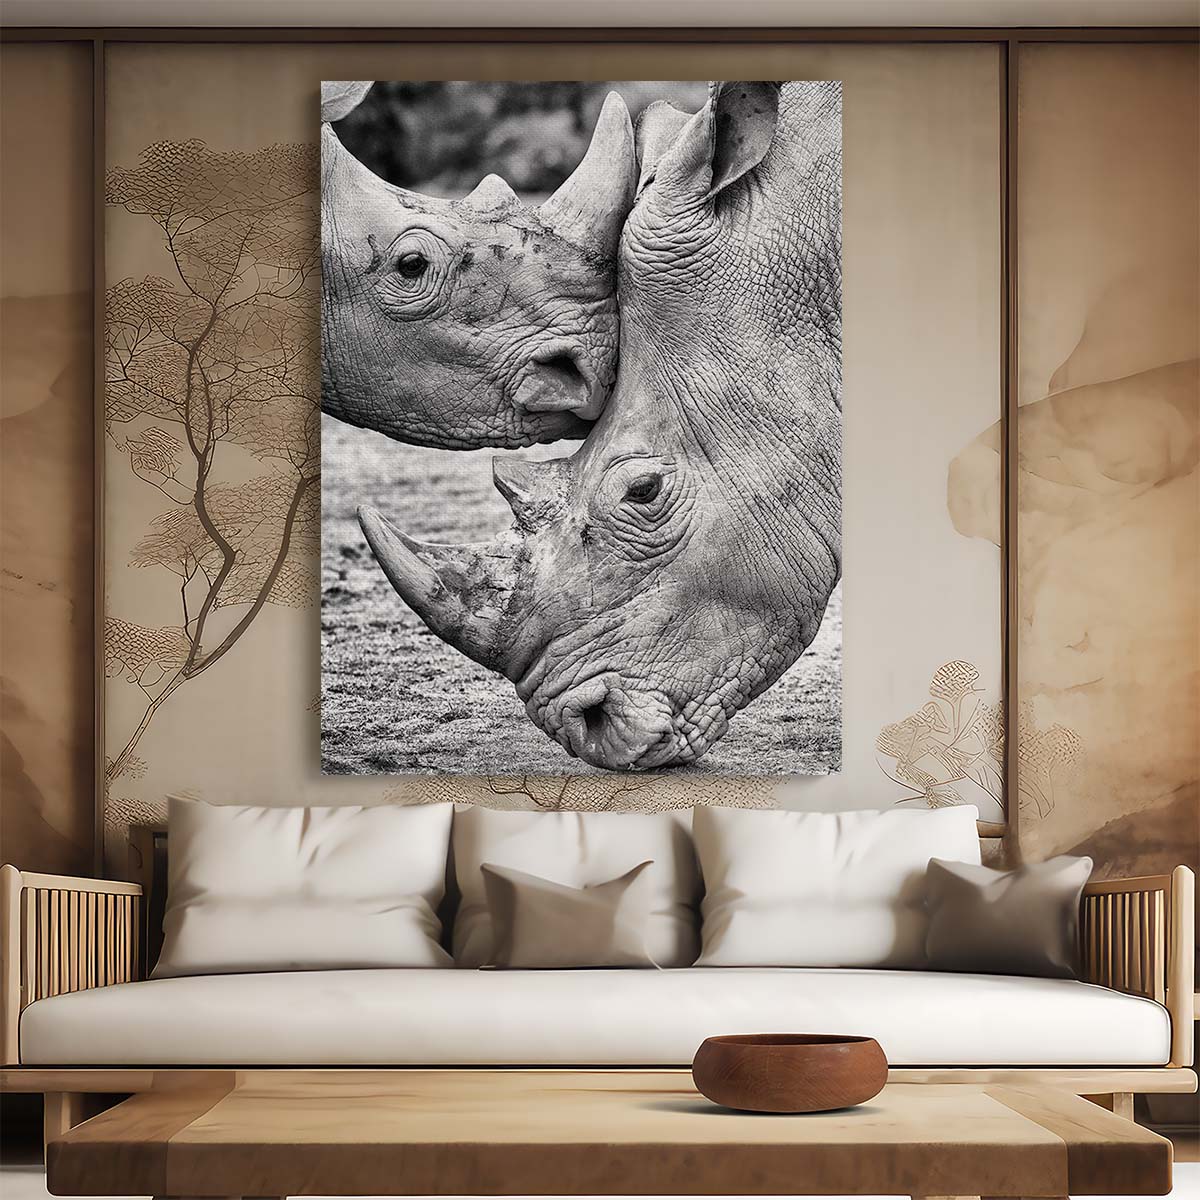 Romantic Rhinoceros Pair Photography Art, Monochrome Love in Spain by Luxuriance Designs, made in USA